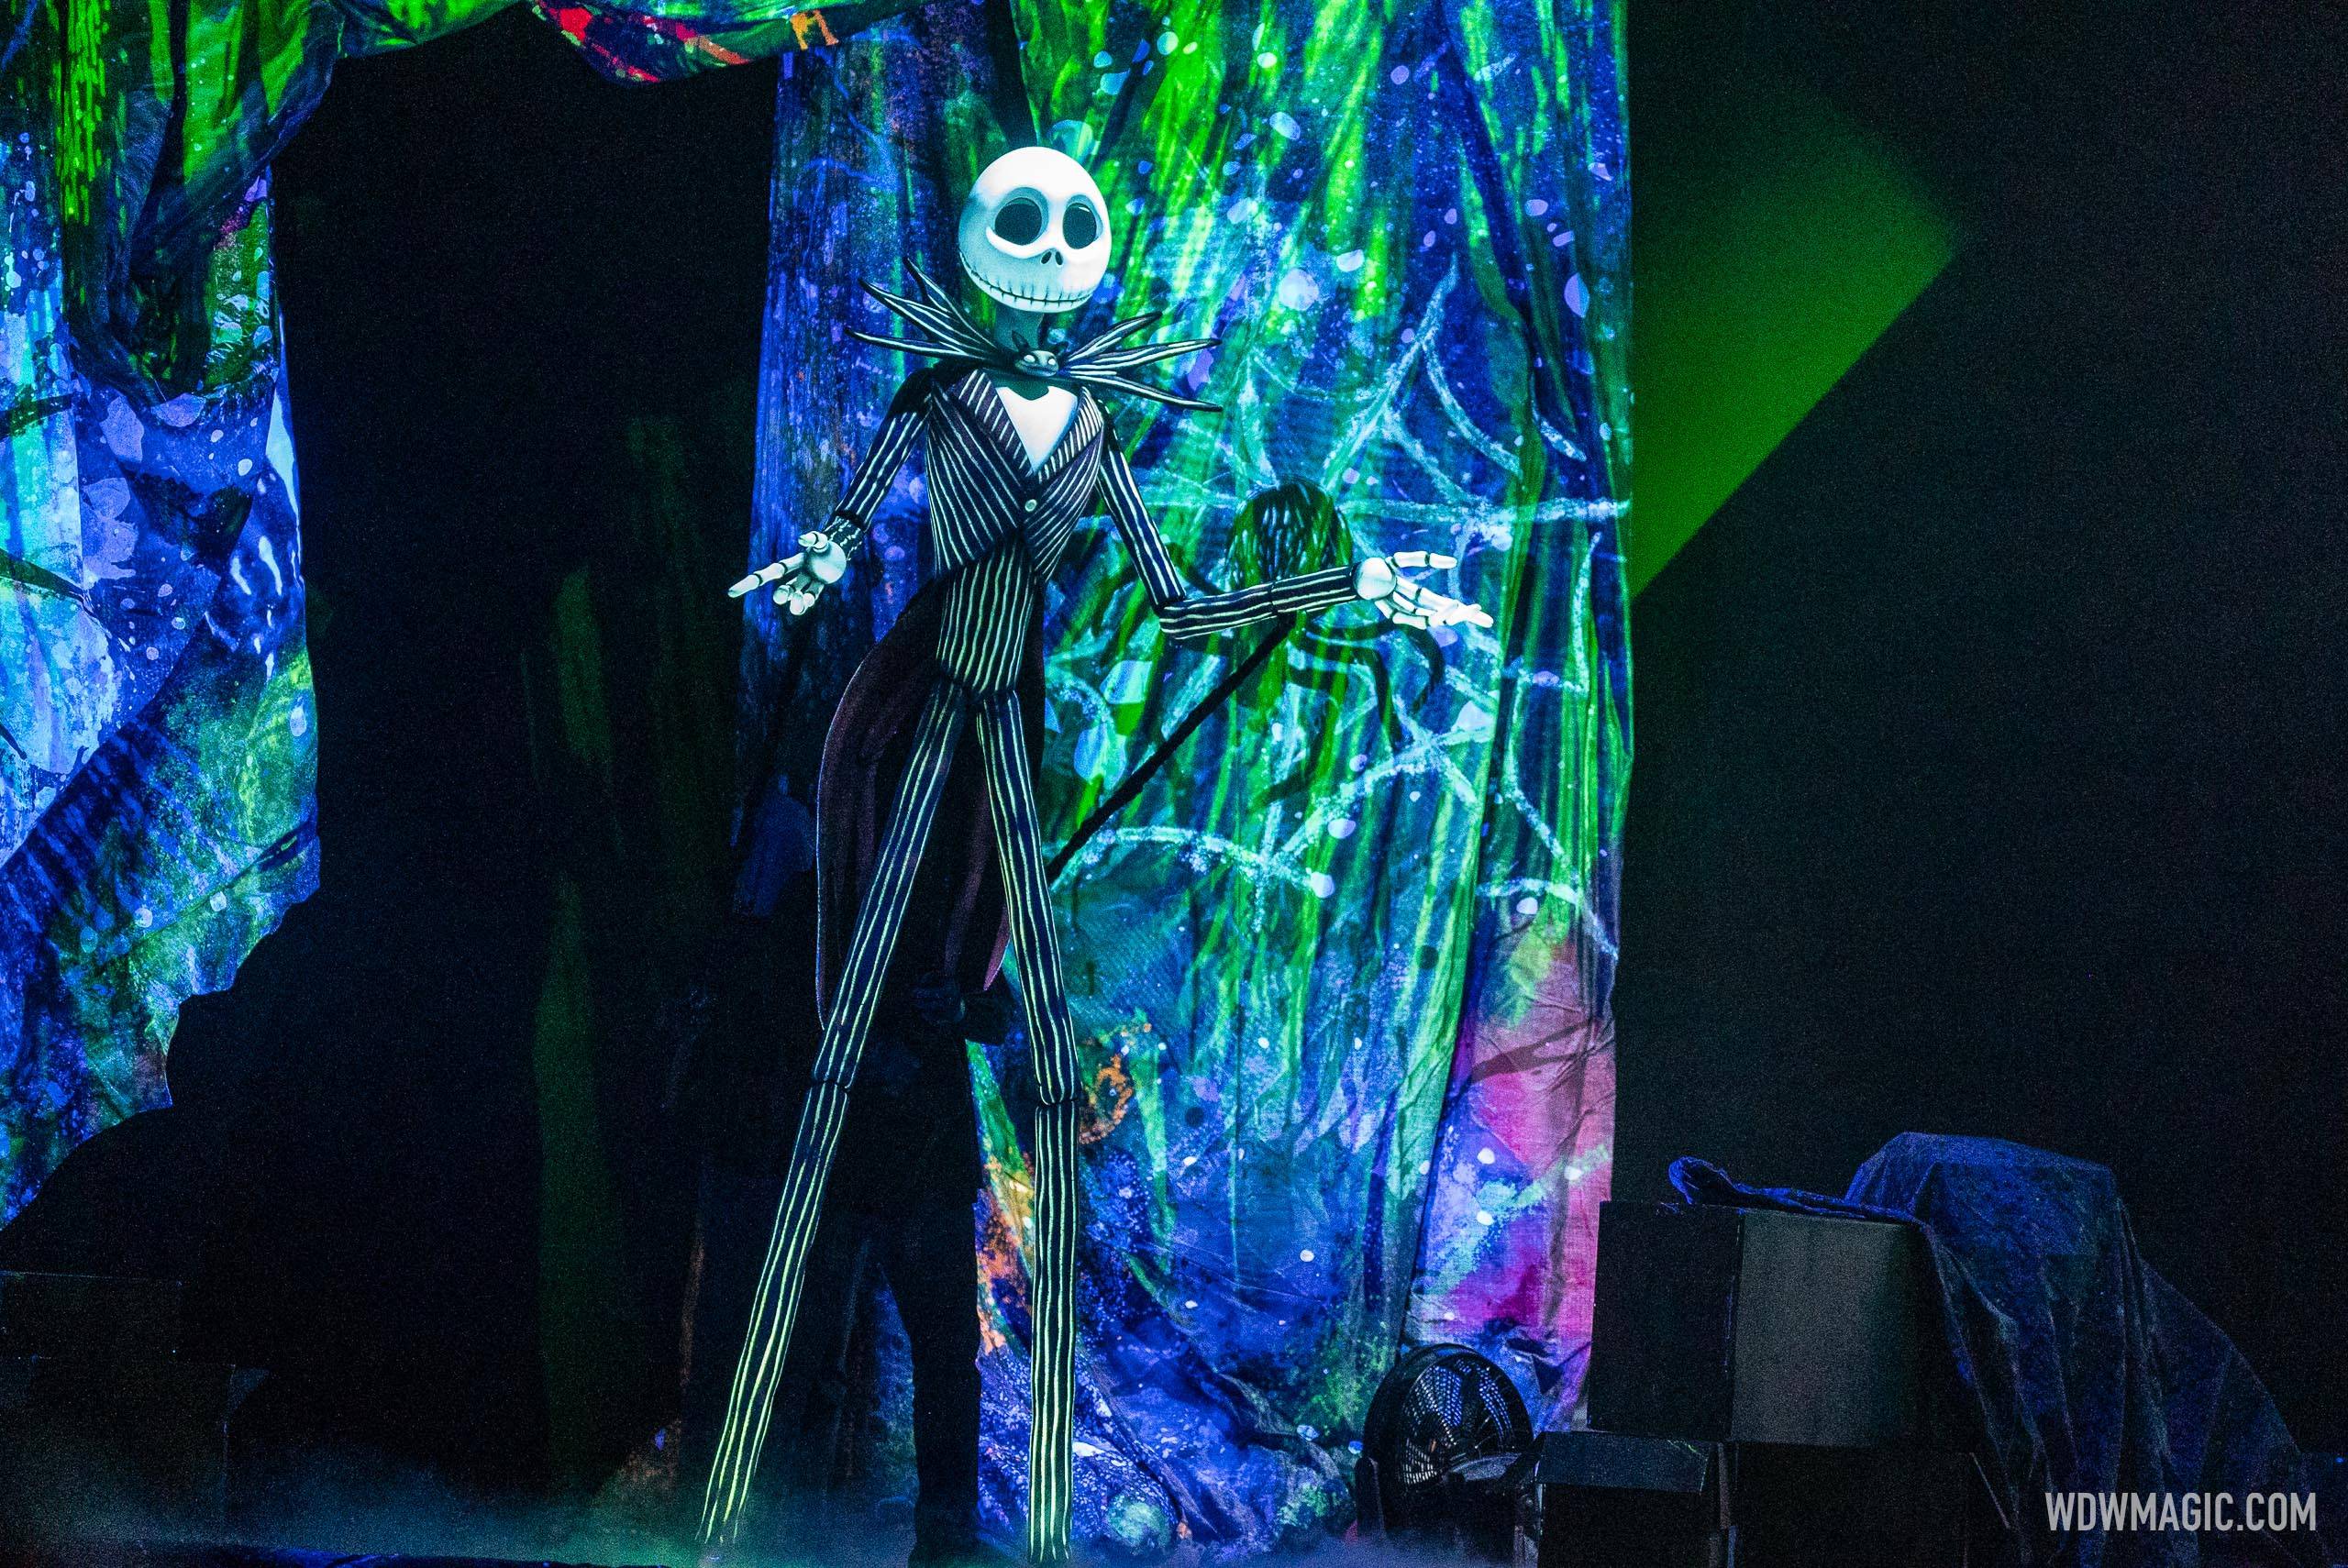 What's This? Tim Burton's The Nightmare Before Christmas Sing-Along show